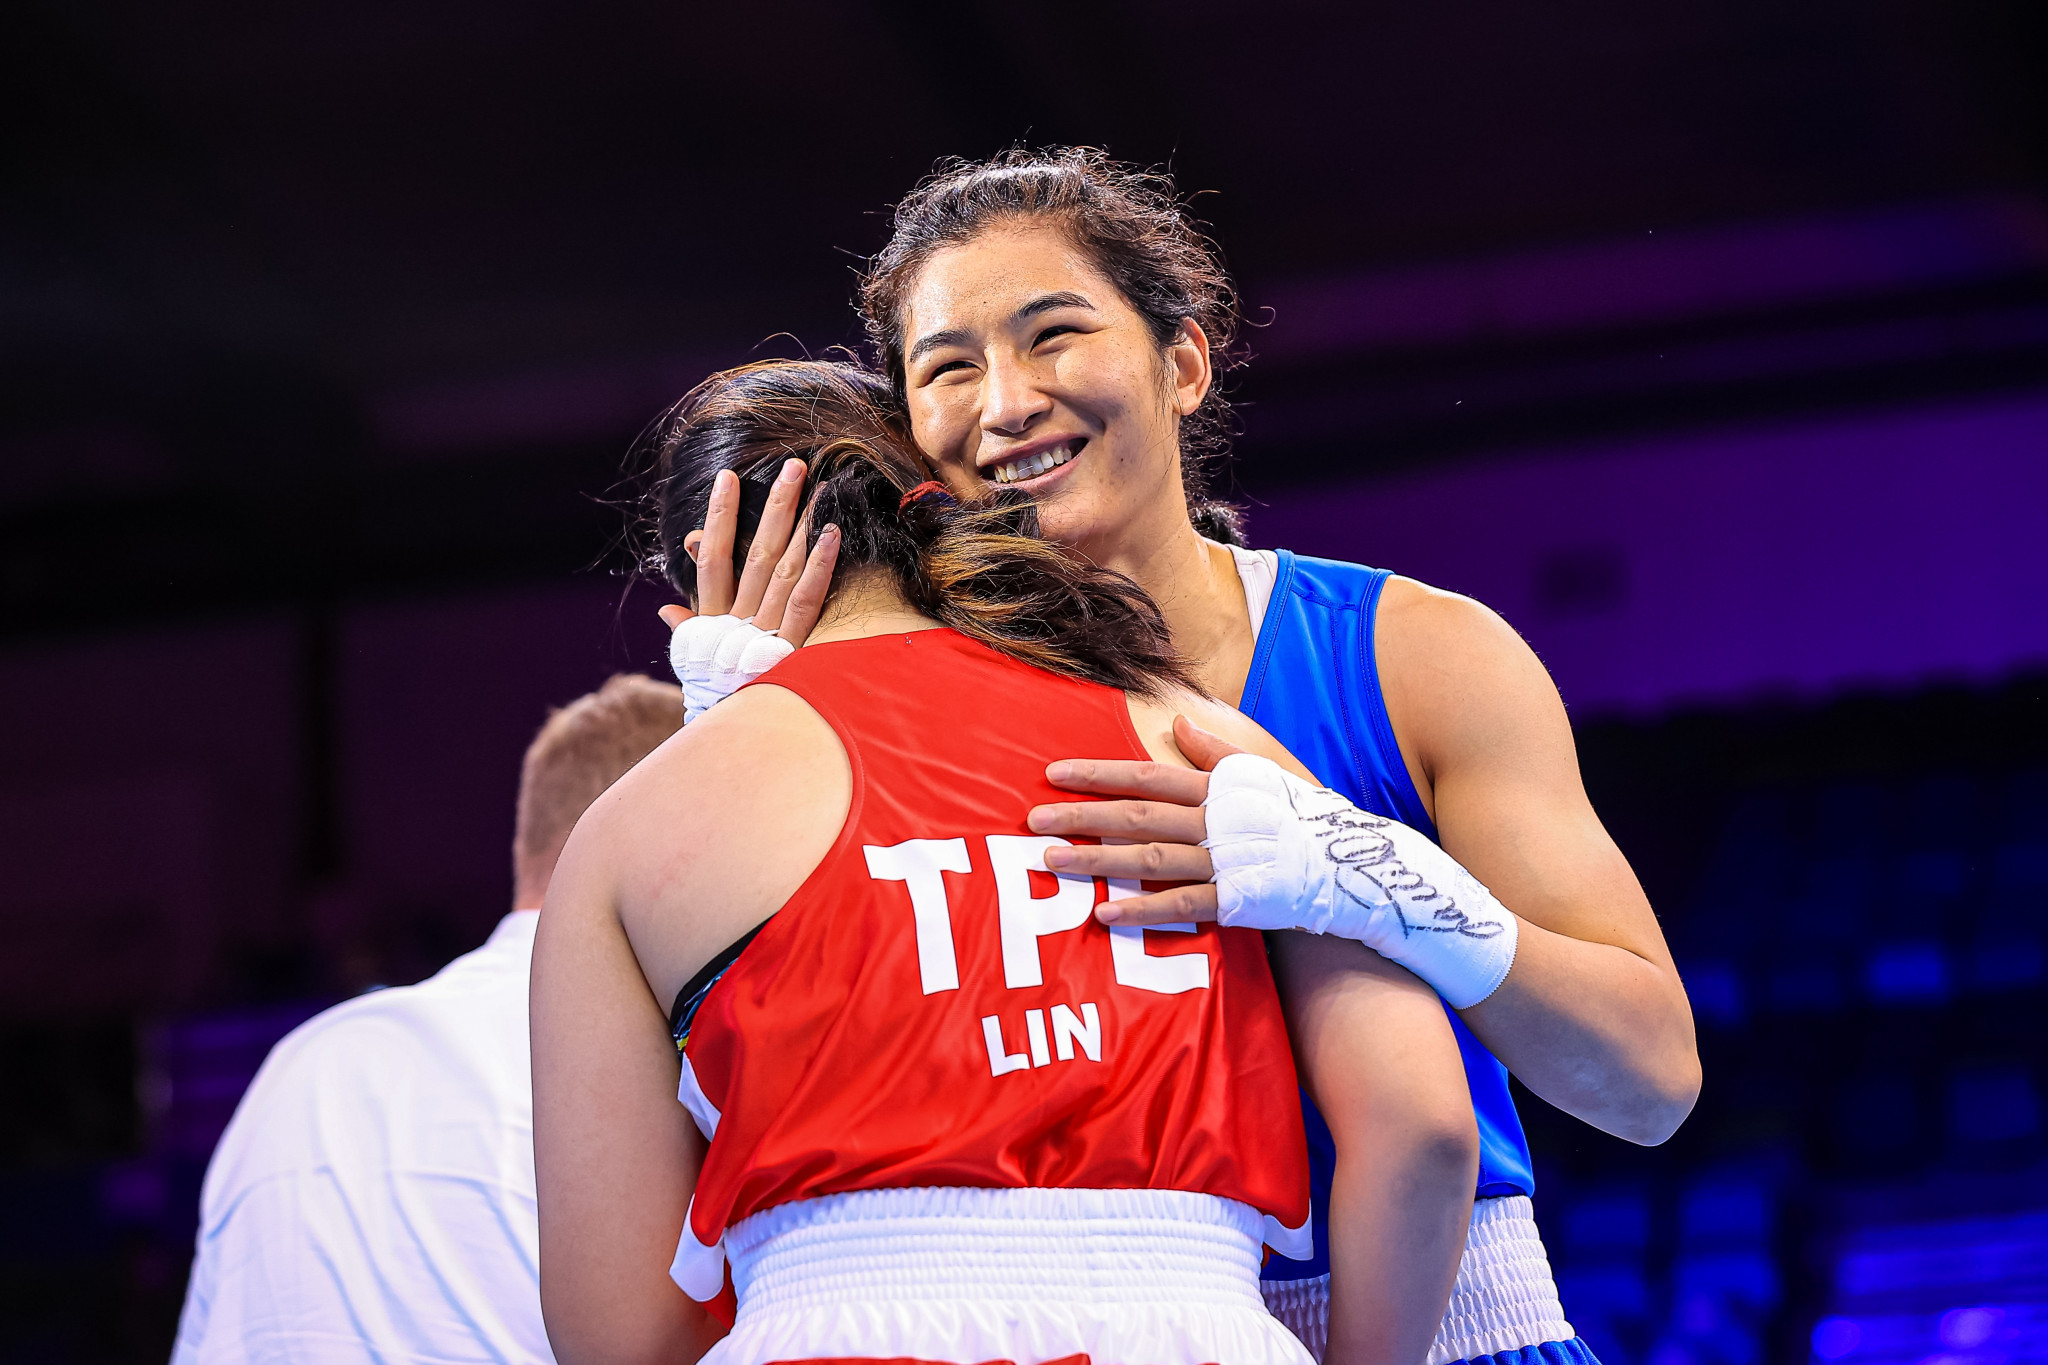 China's double Olympic medallist Li Qian embraces Lin Chien-yu of Chinese Taipei following her victory ©IBA